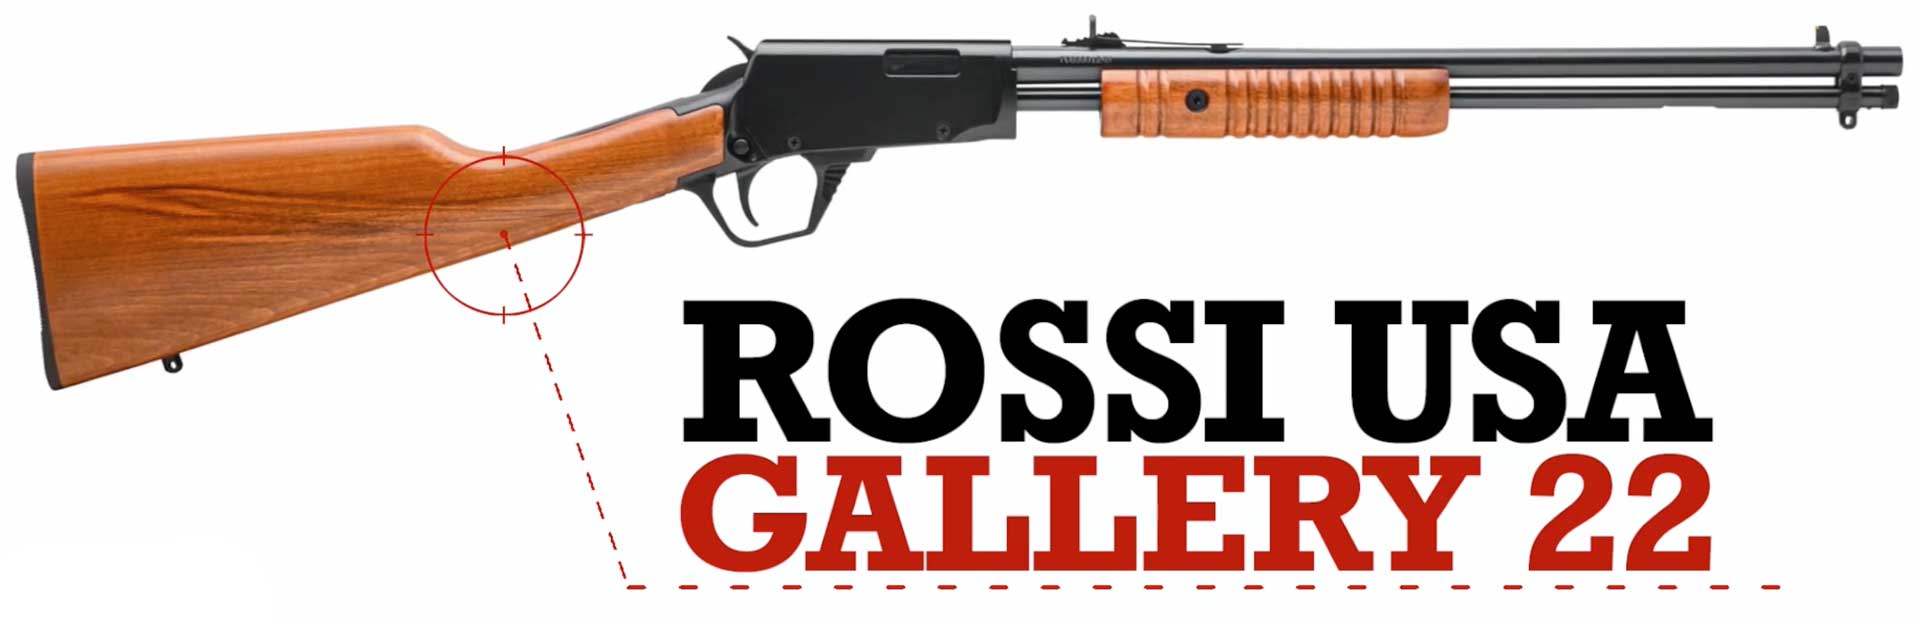 right side pump-action rifle wood metal black text on image noting "rossi usa gallery 22"